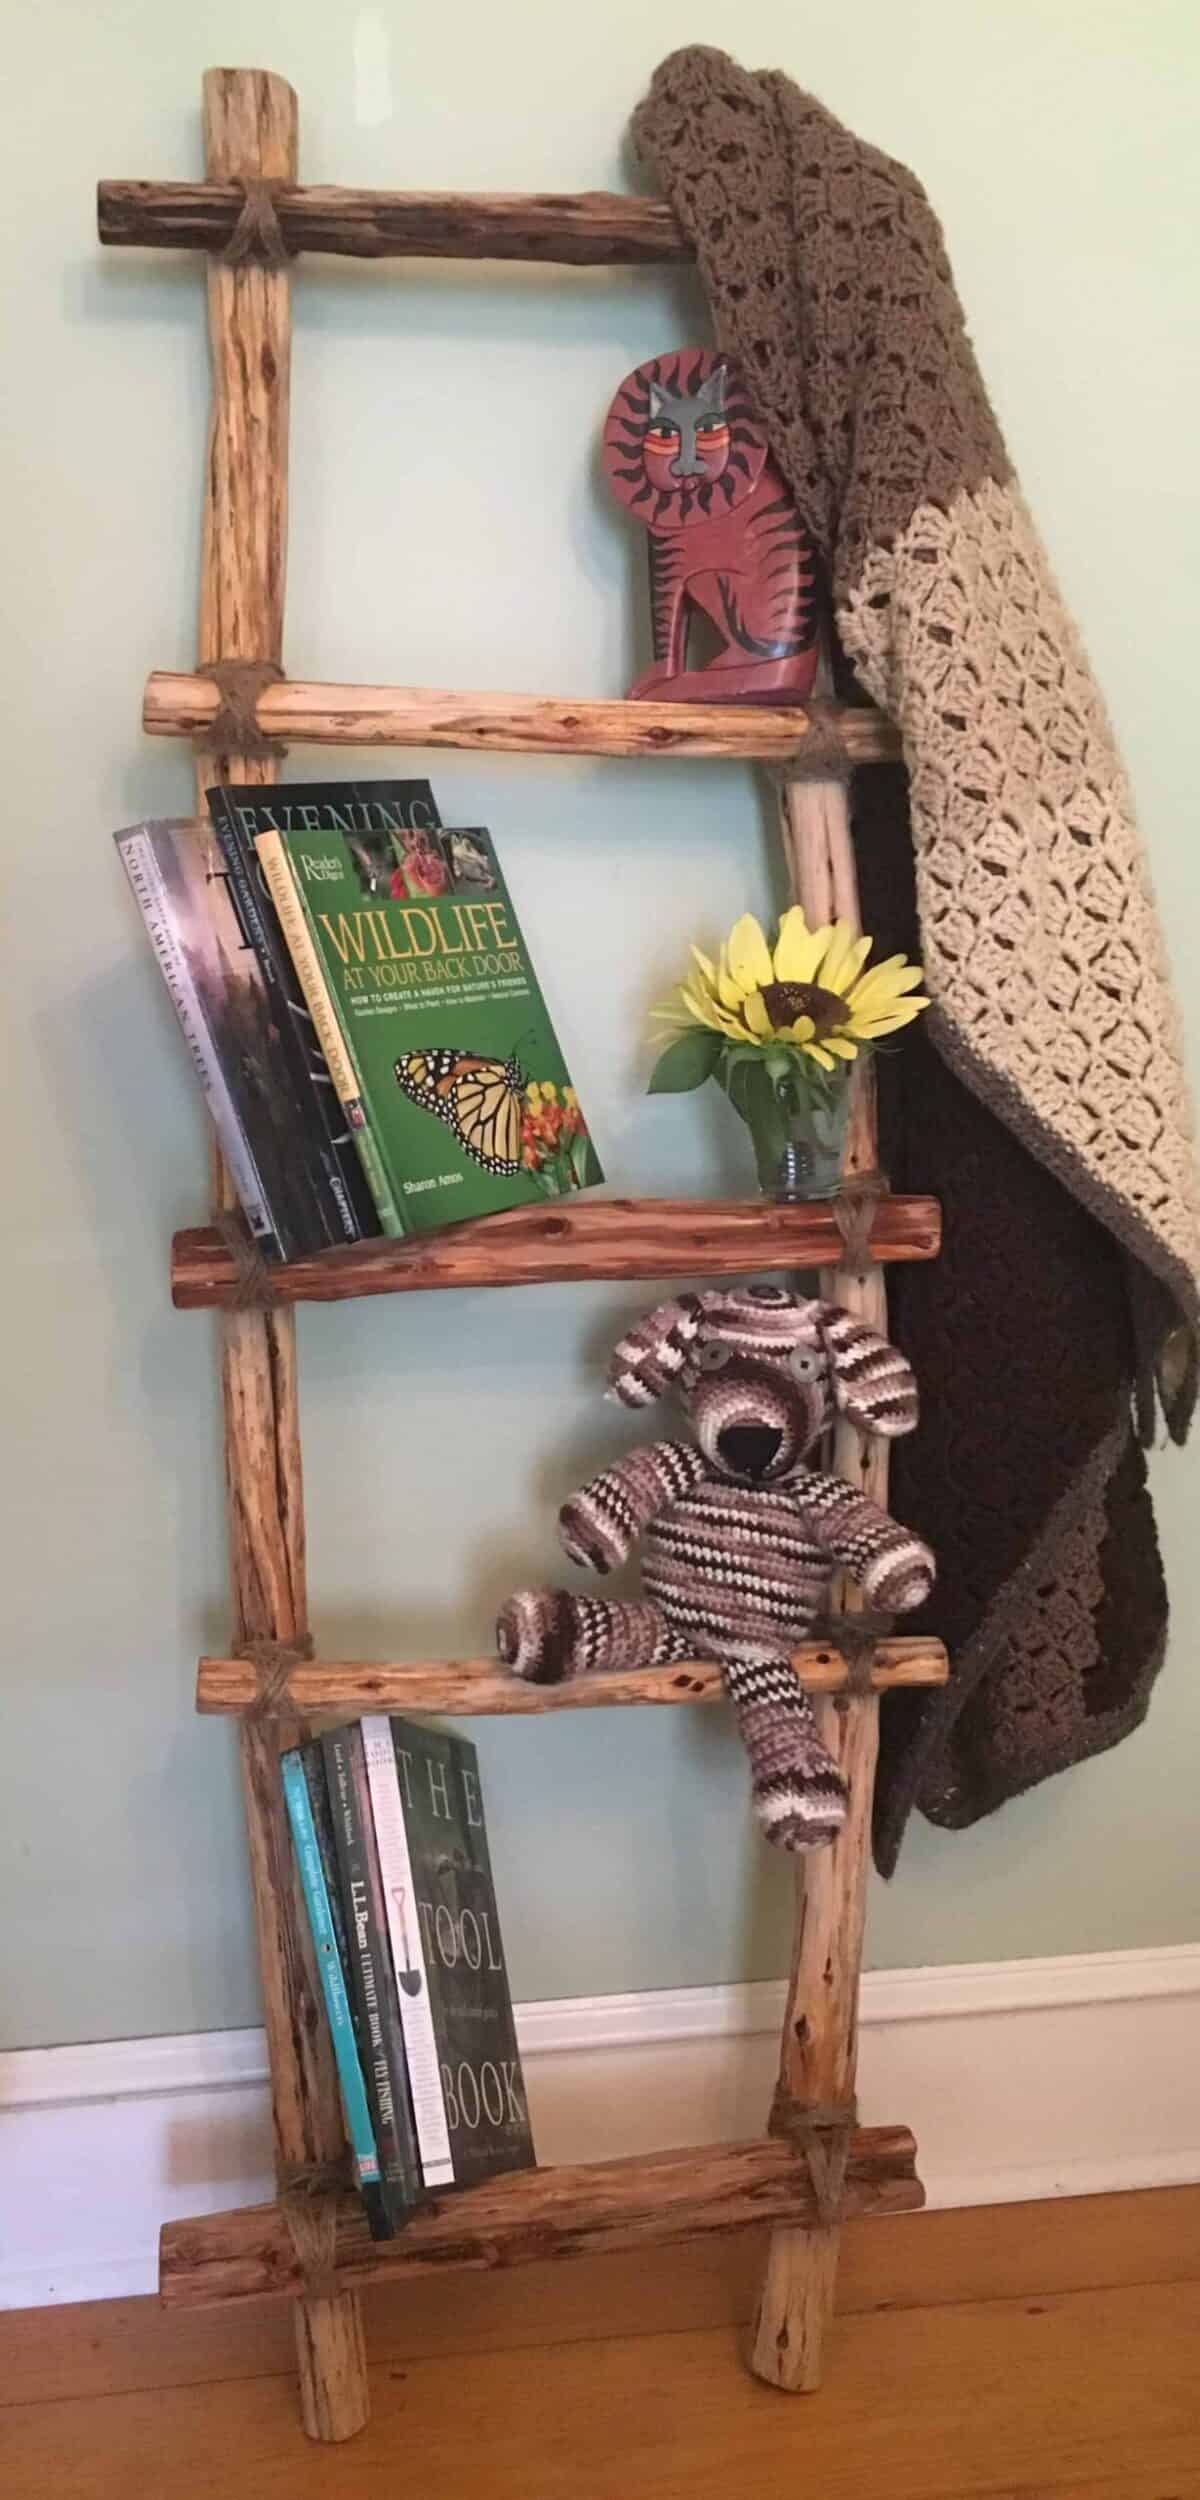 Ladder with books, dolls, and flowers.